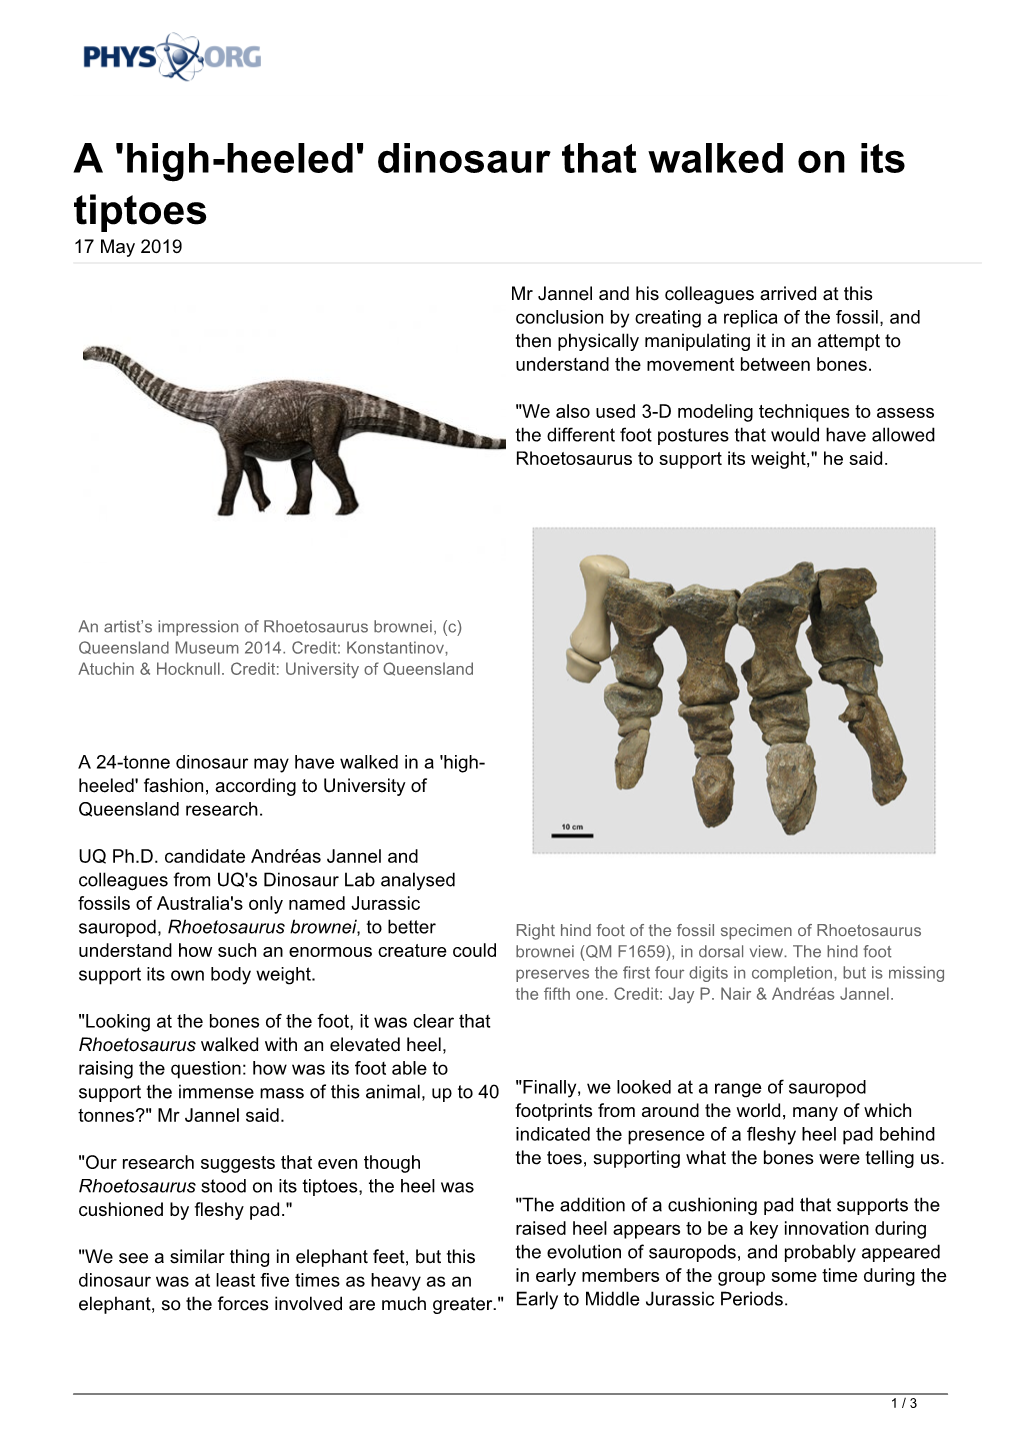 A 'High-Heeled' Dinosaur That Walked on Its Tiptoes 17 May 2019